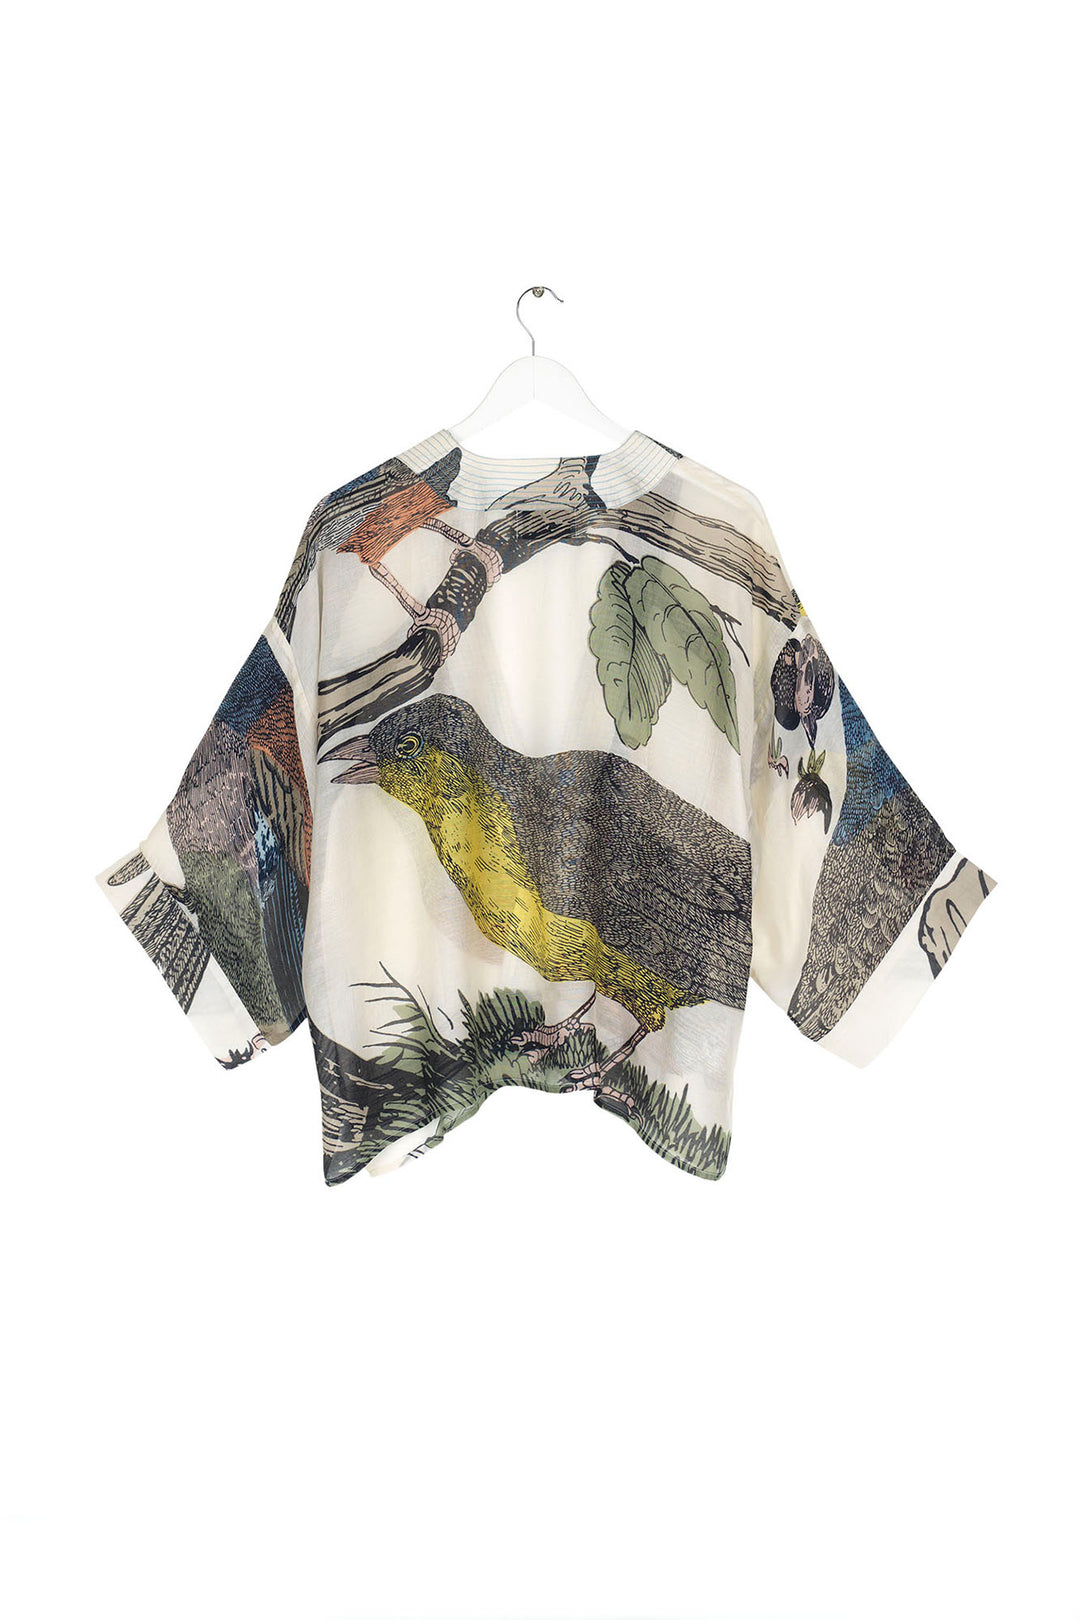 ladies lightweight winter short kimono with a colourful bird print on a light stone background by One Hundred Stars